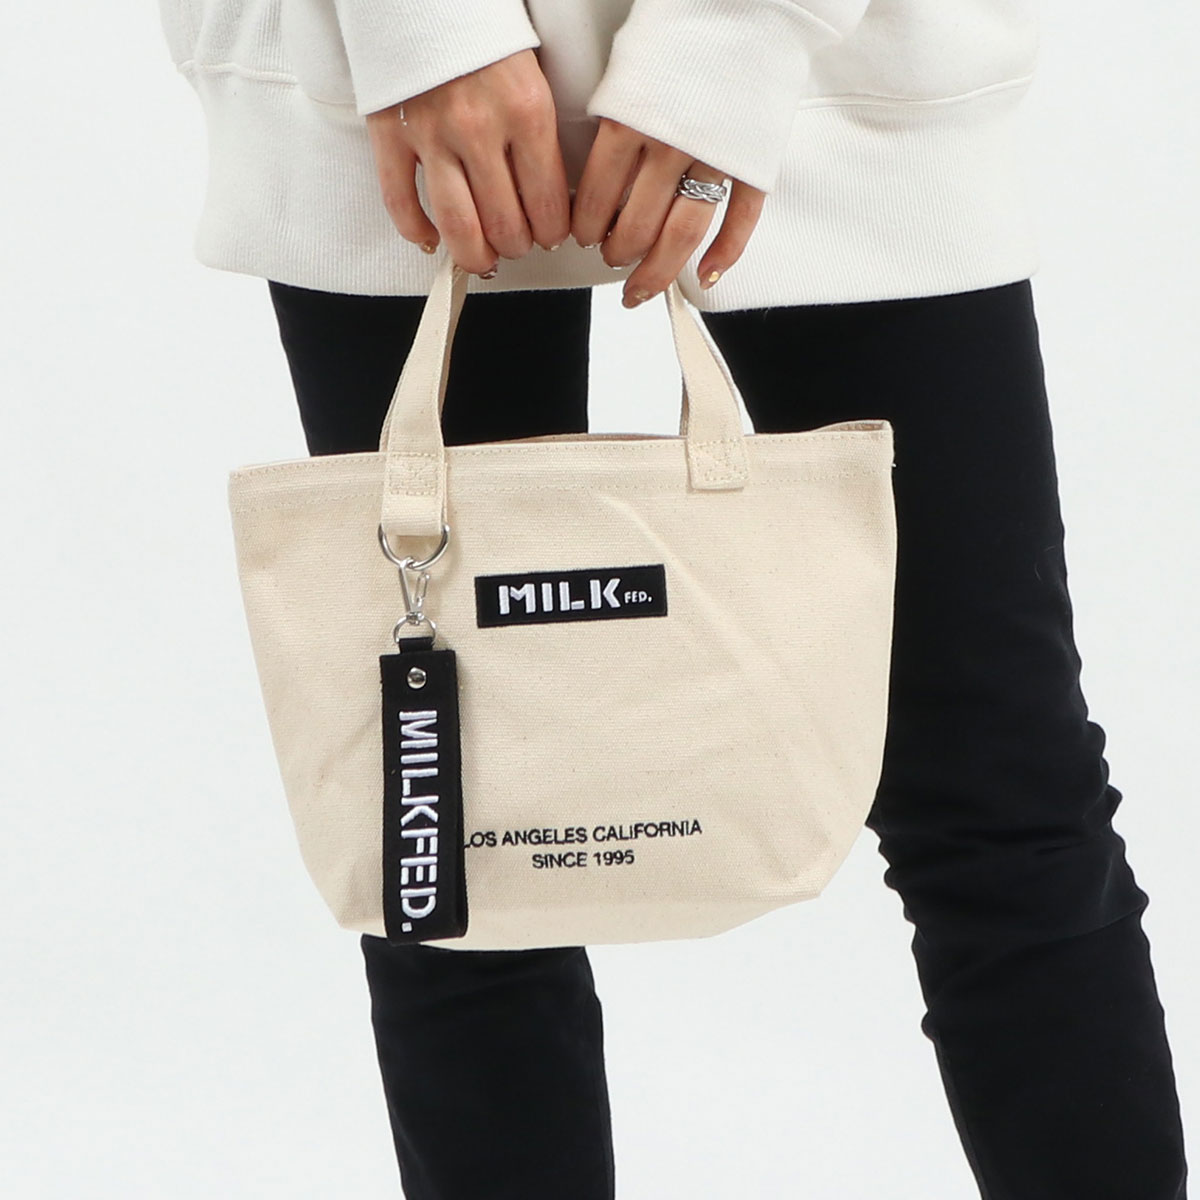 MILKFED. ミルクフェド BAR AND UNDER LOGO LUNCH TOTE トートバッグ ...